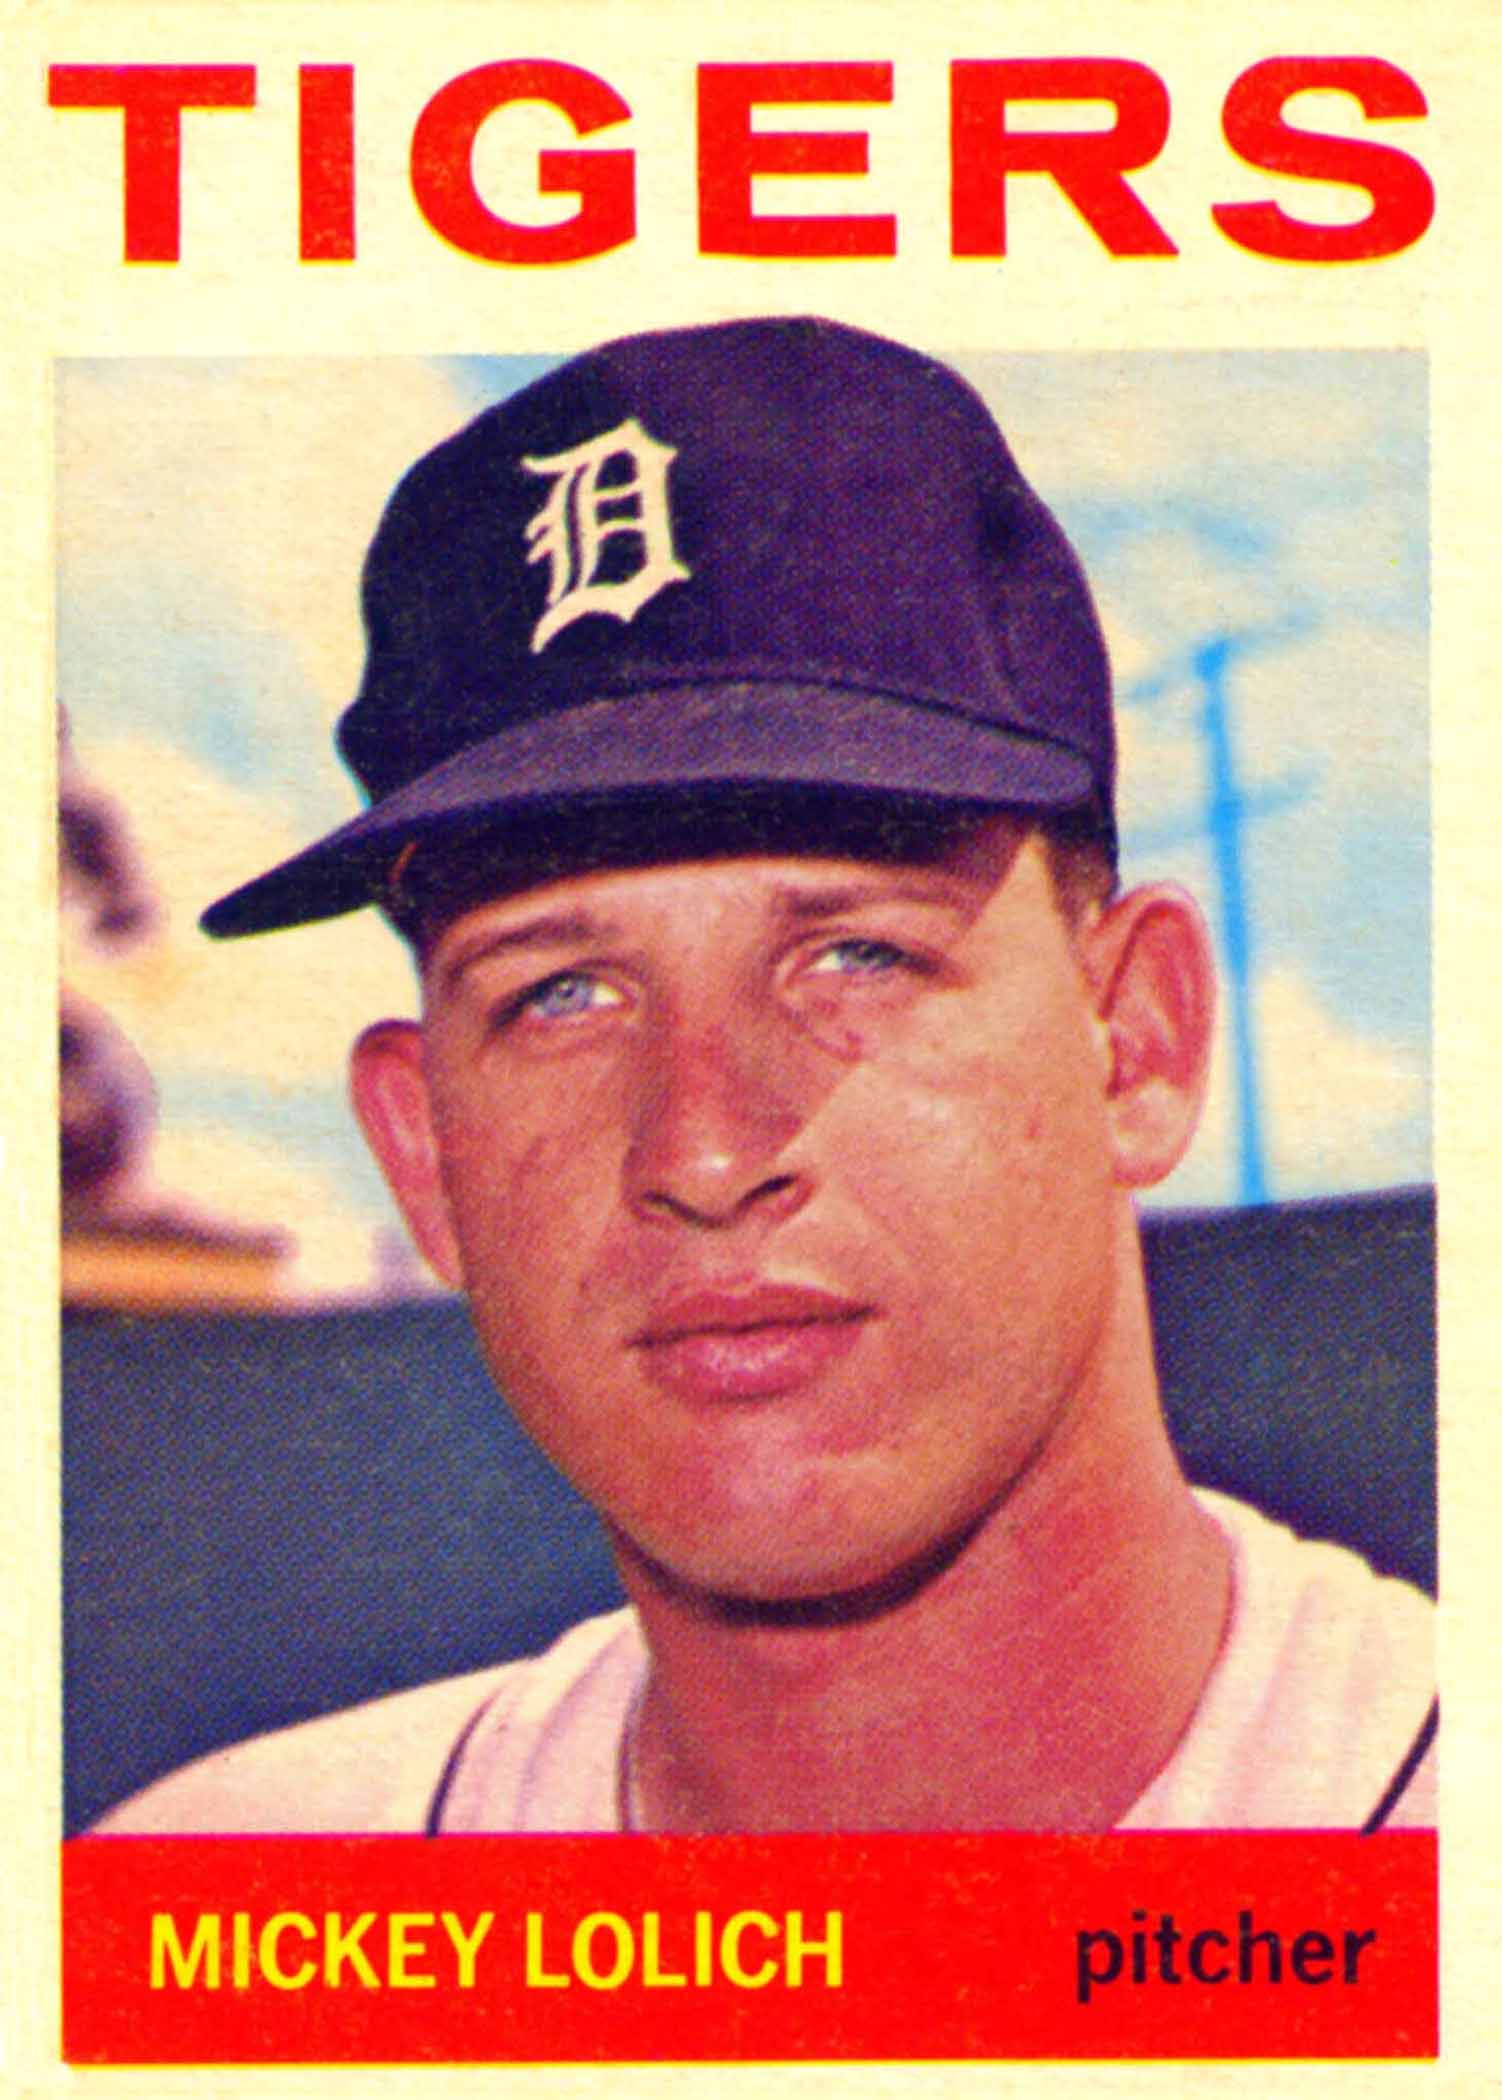 1972 Topps - Mickey Lolich #450 (Pitcher) - Autographed Ba…